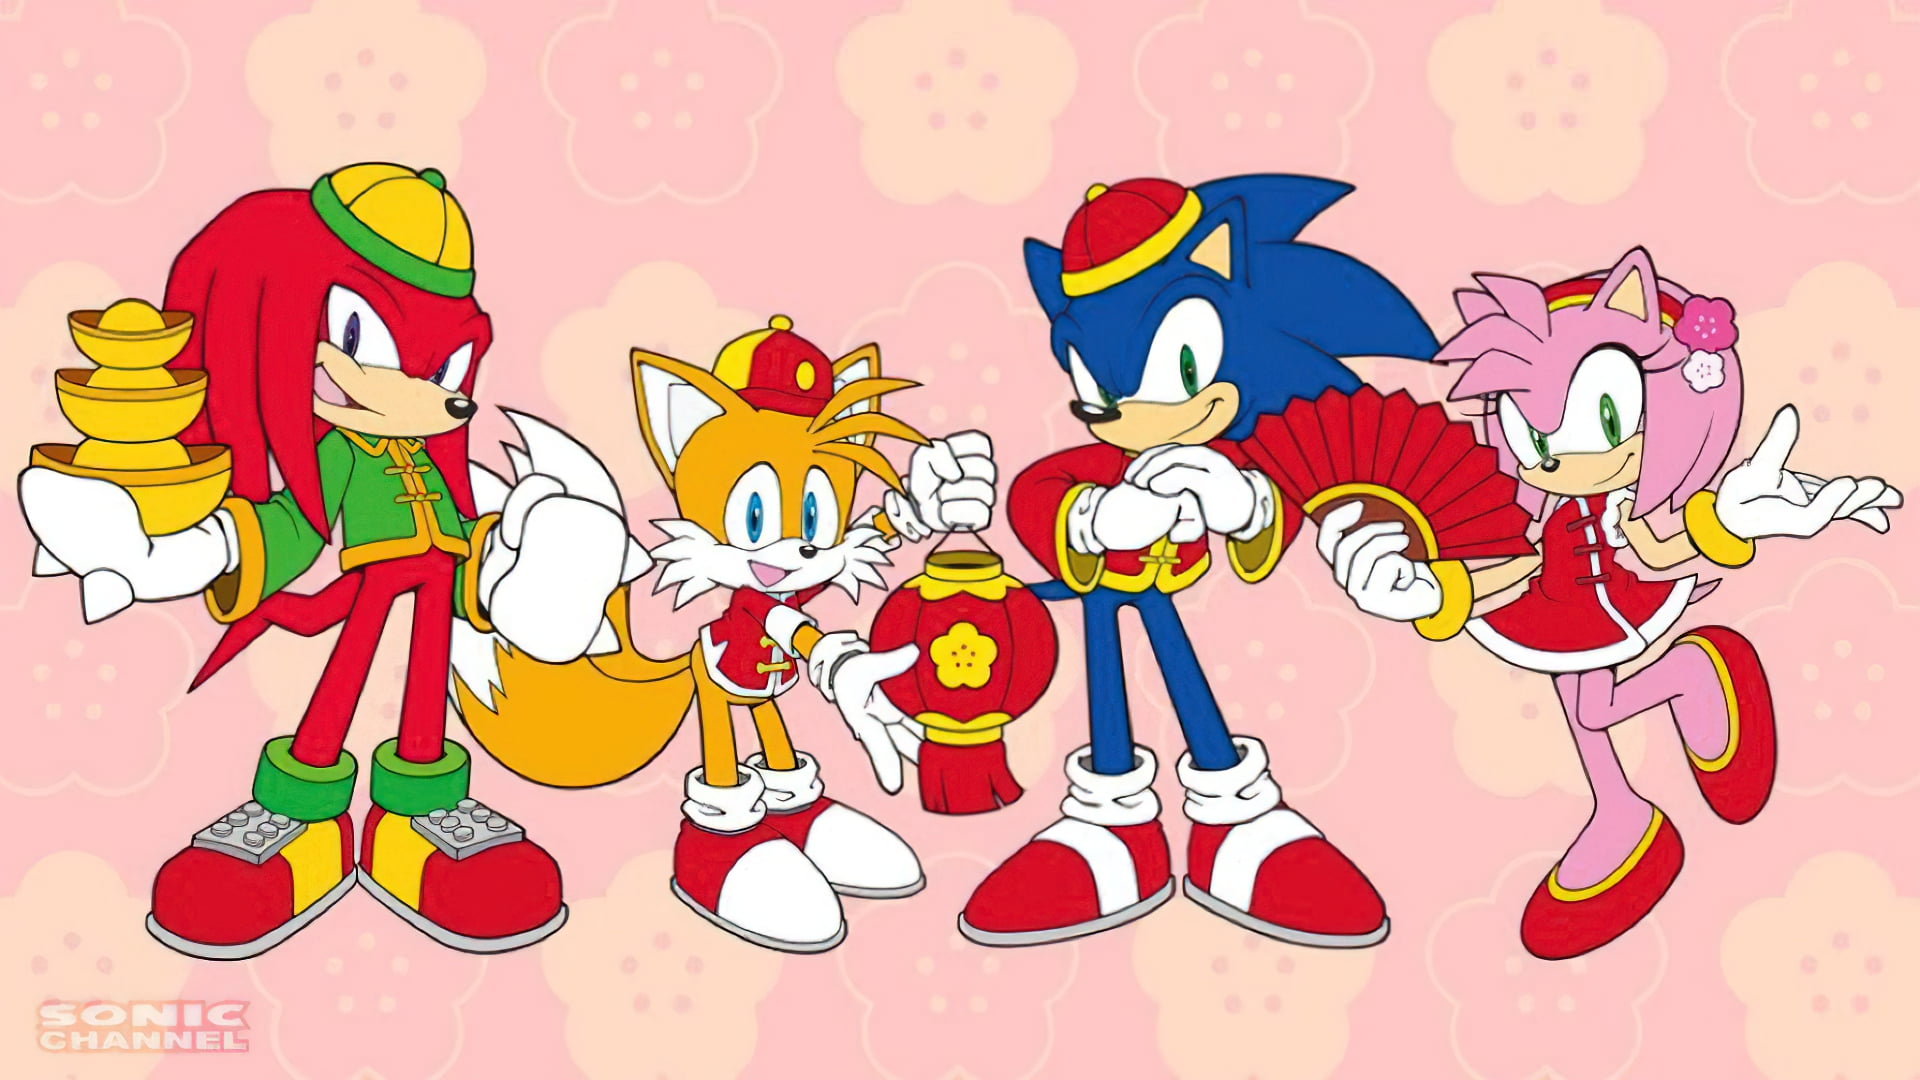 Sonic, Tails (character), Amy Rose, Knuckles, Sonic the Hedgehog